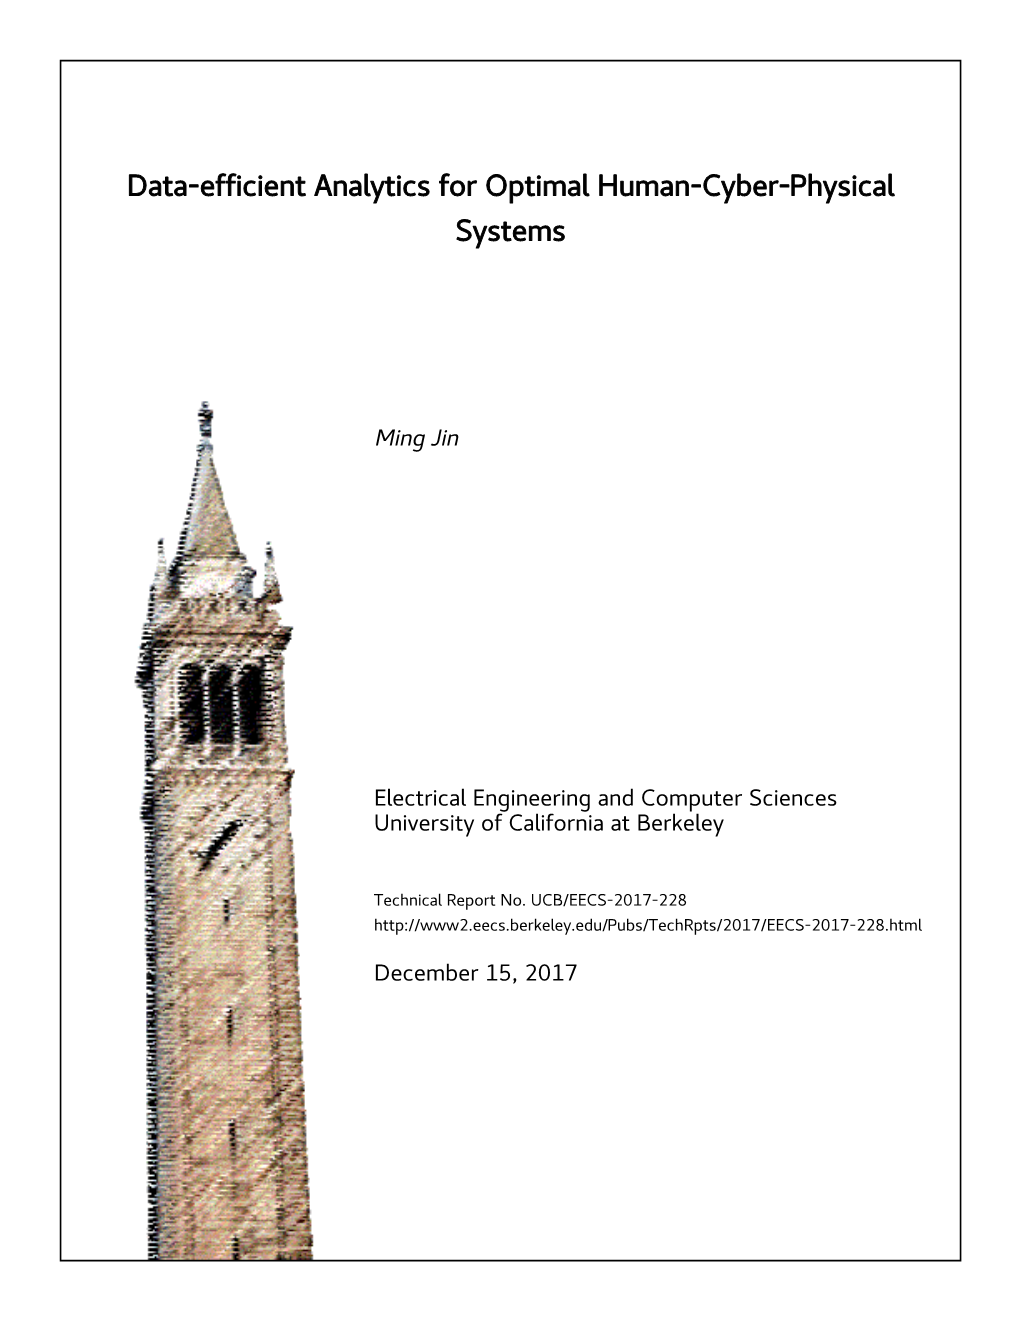 Data-Efficient Analytics for Optimal Human-Cyber-Physical Systems